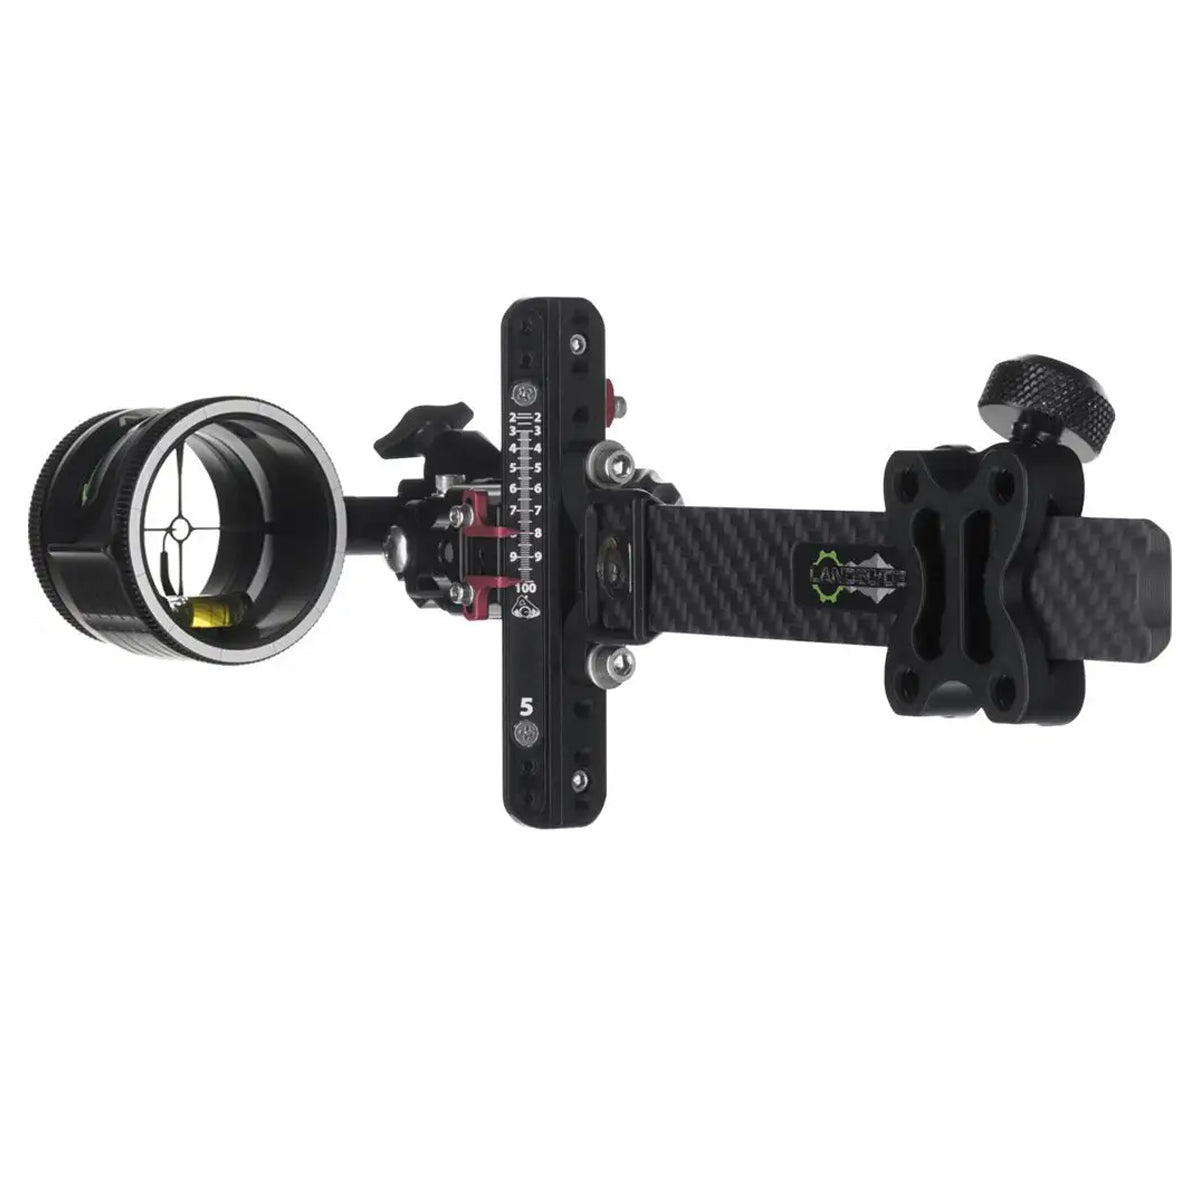 Axcel Landslyde Plus Carbon Pro Slider Sight AVX-41 Scope 1 Pin Bow Sight in  by GOHUNT | Axcel - GOHUNT Shop